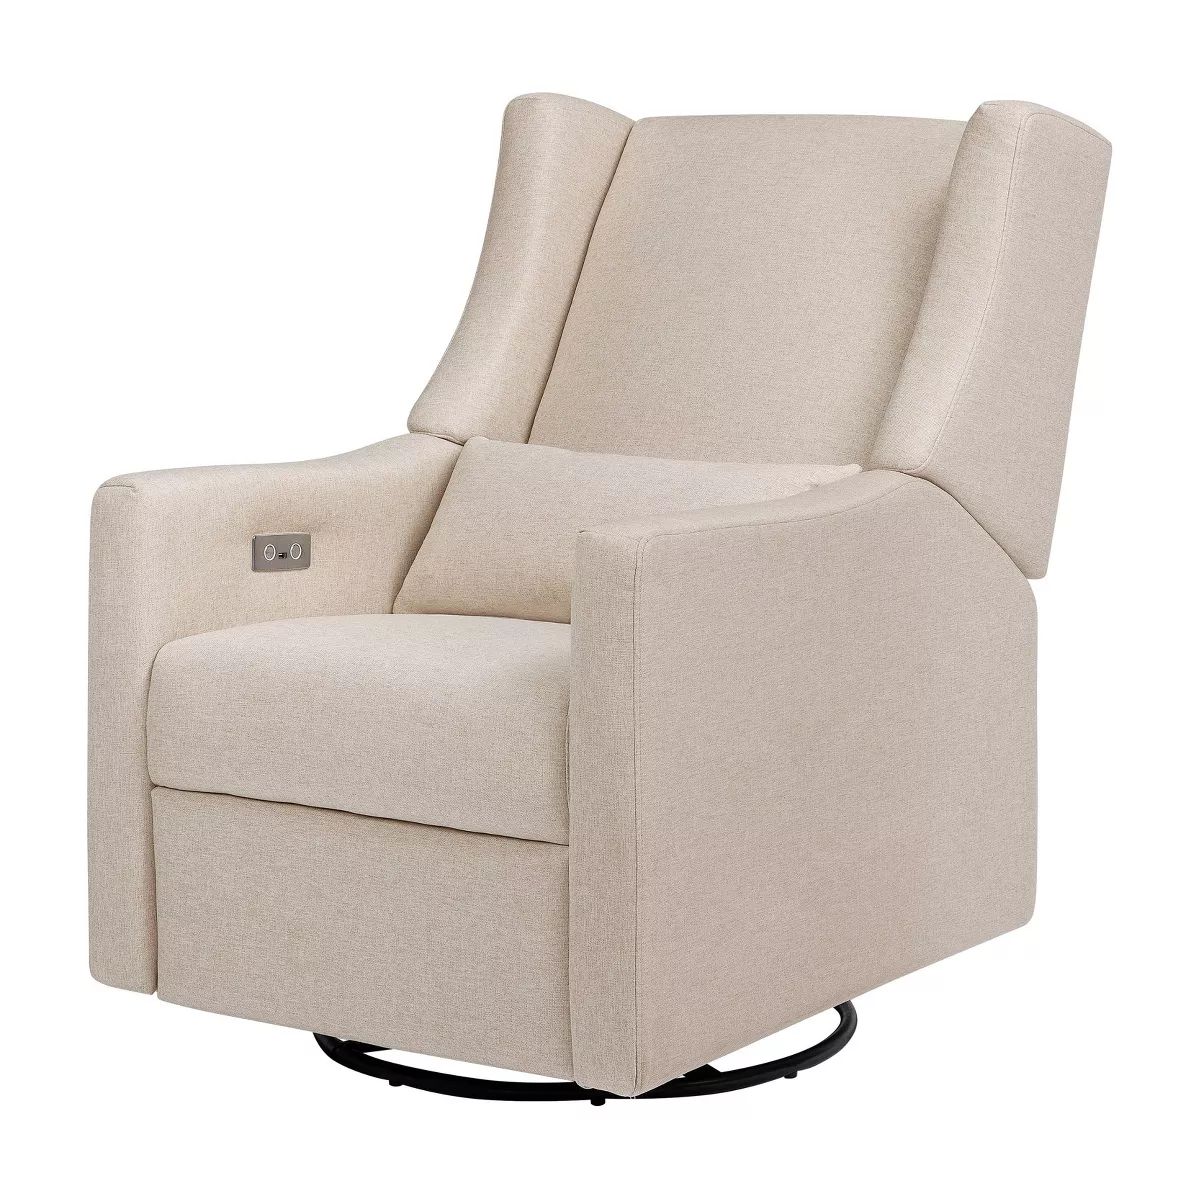 Babyletto Kiwi Glider Recliner with Electronic Control and USB | Target